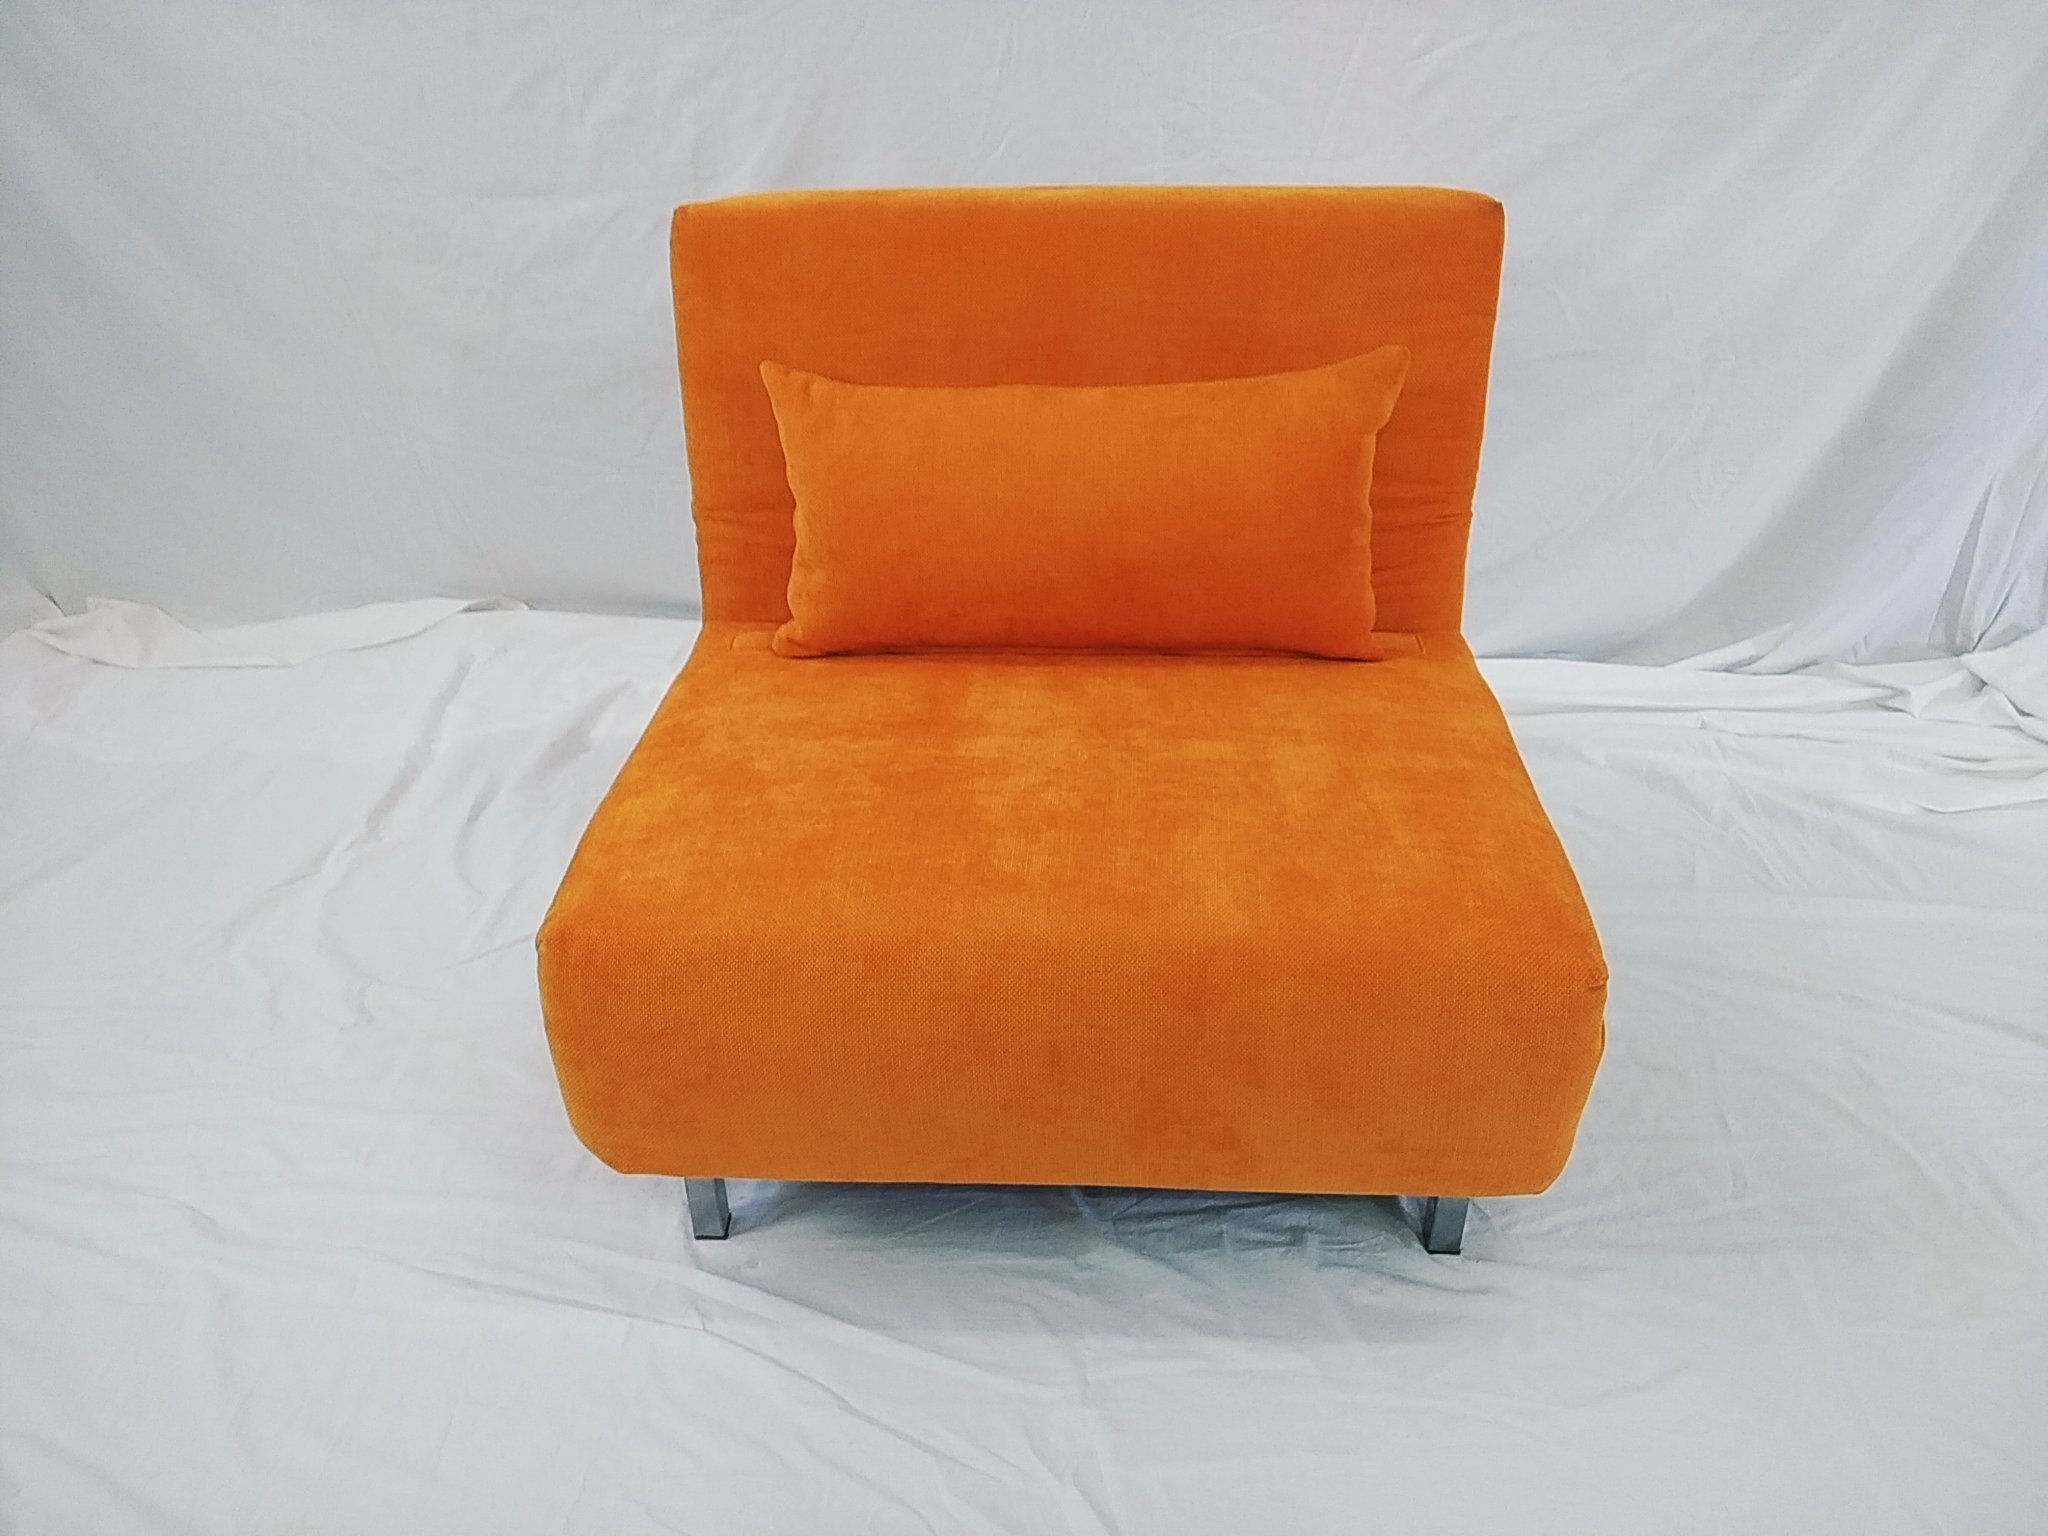 secotional sofa bed nyc